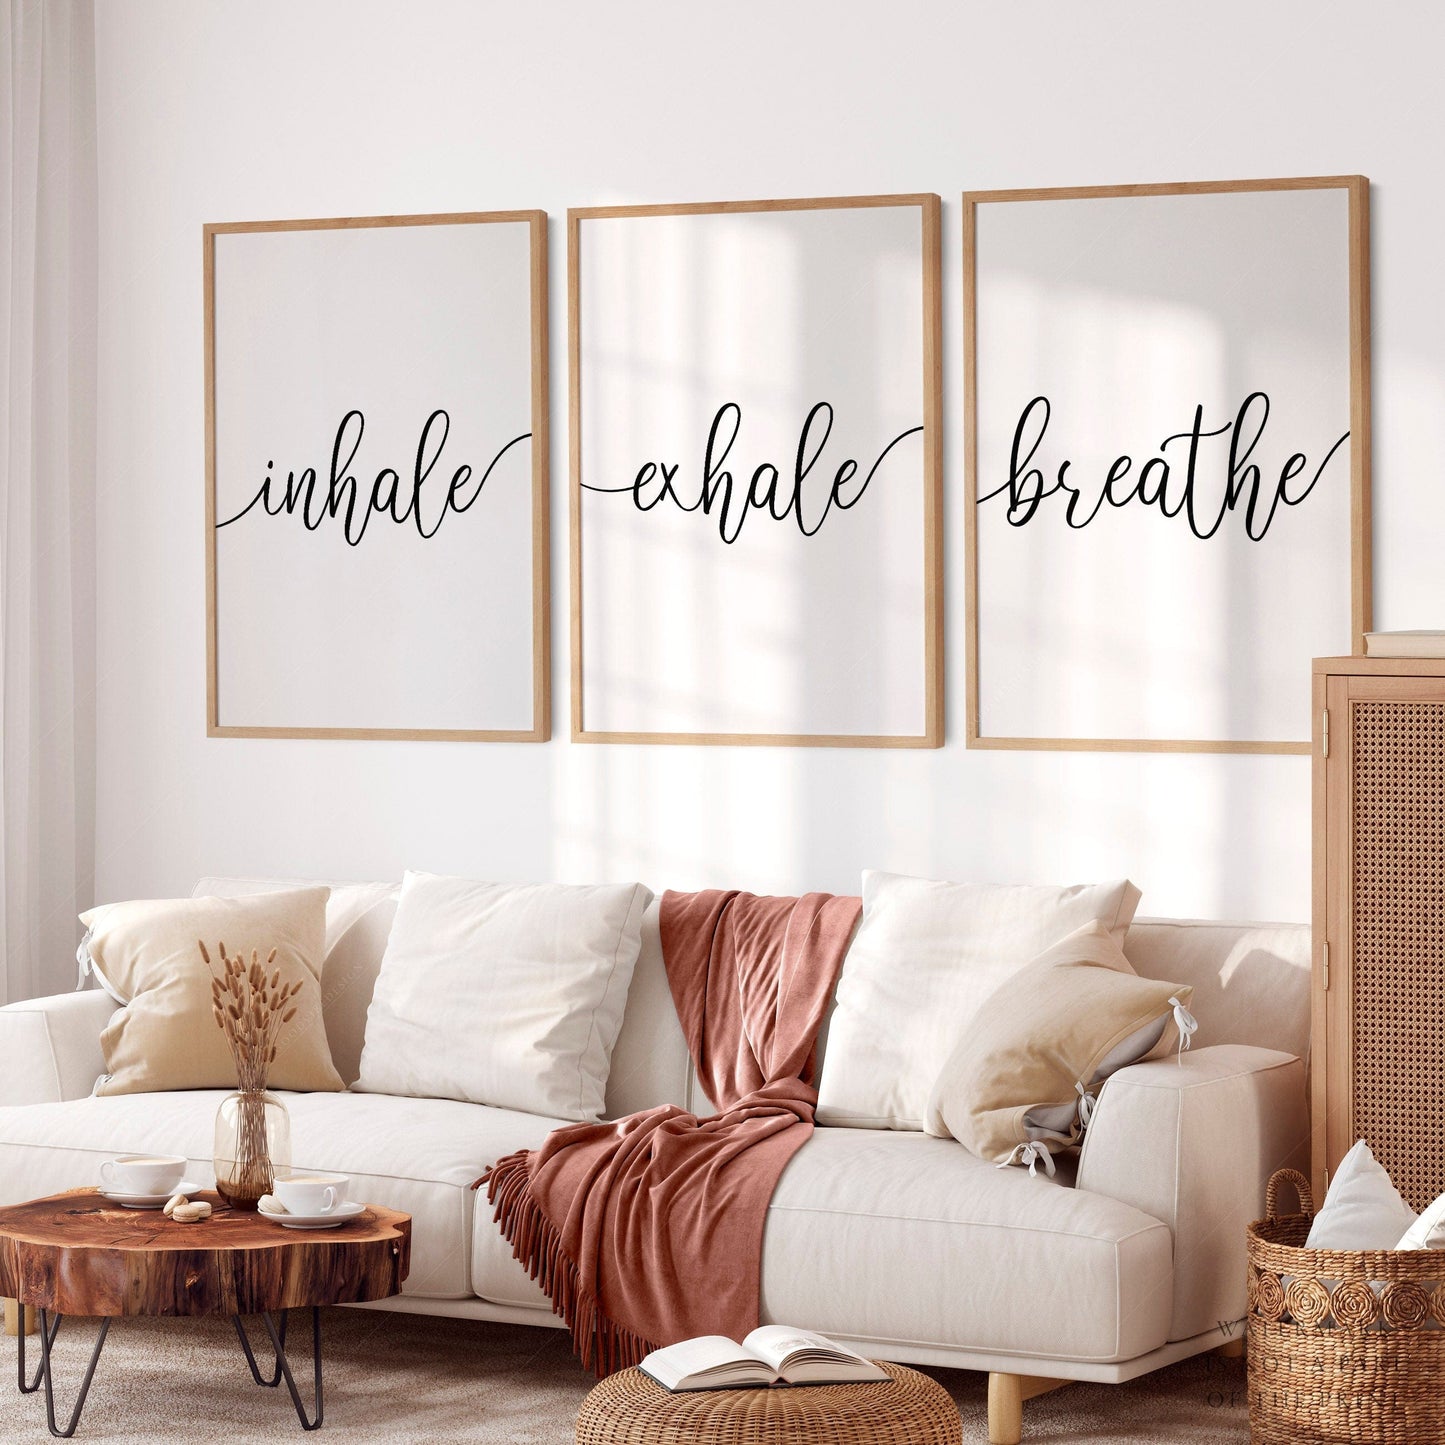 Home Poster Decor Set of 3 print, Bedroom Wall Art, Inhale Exhale Breathe, Above bed decor, Black White print, Mindfulness Art, Relax Sign up to 24"x36"